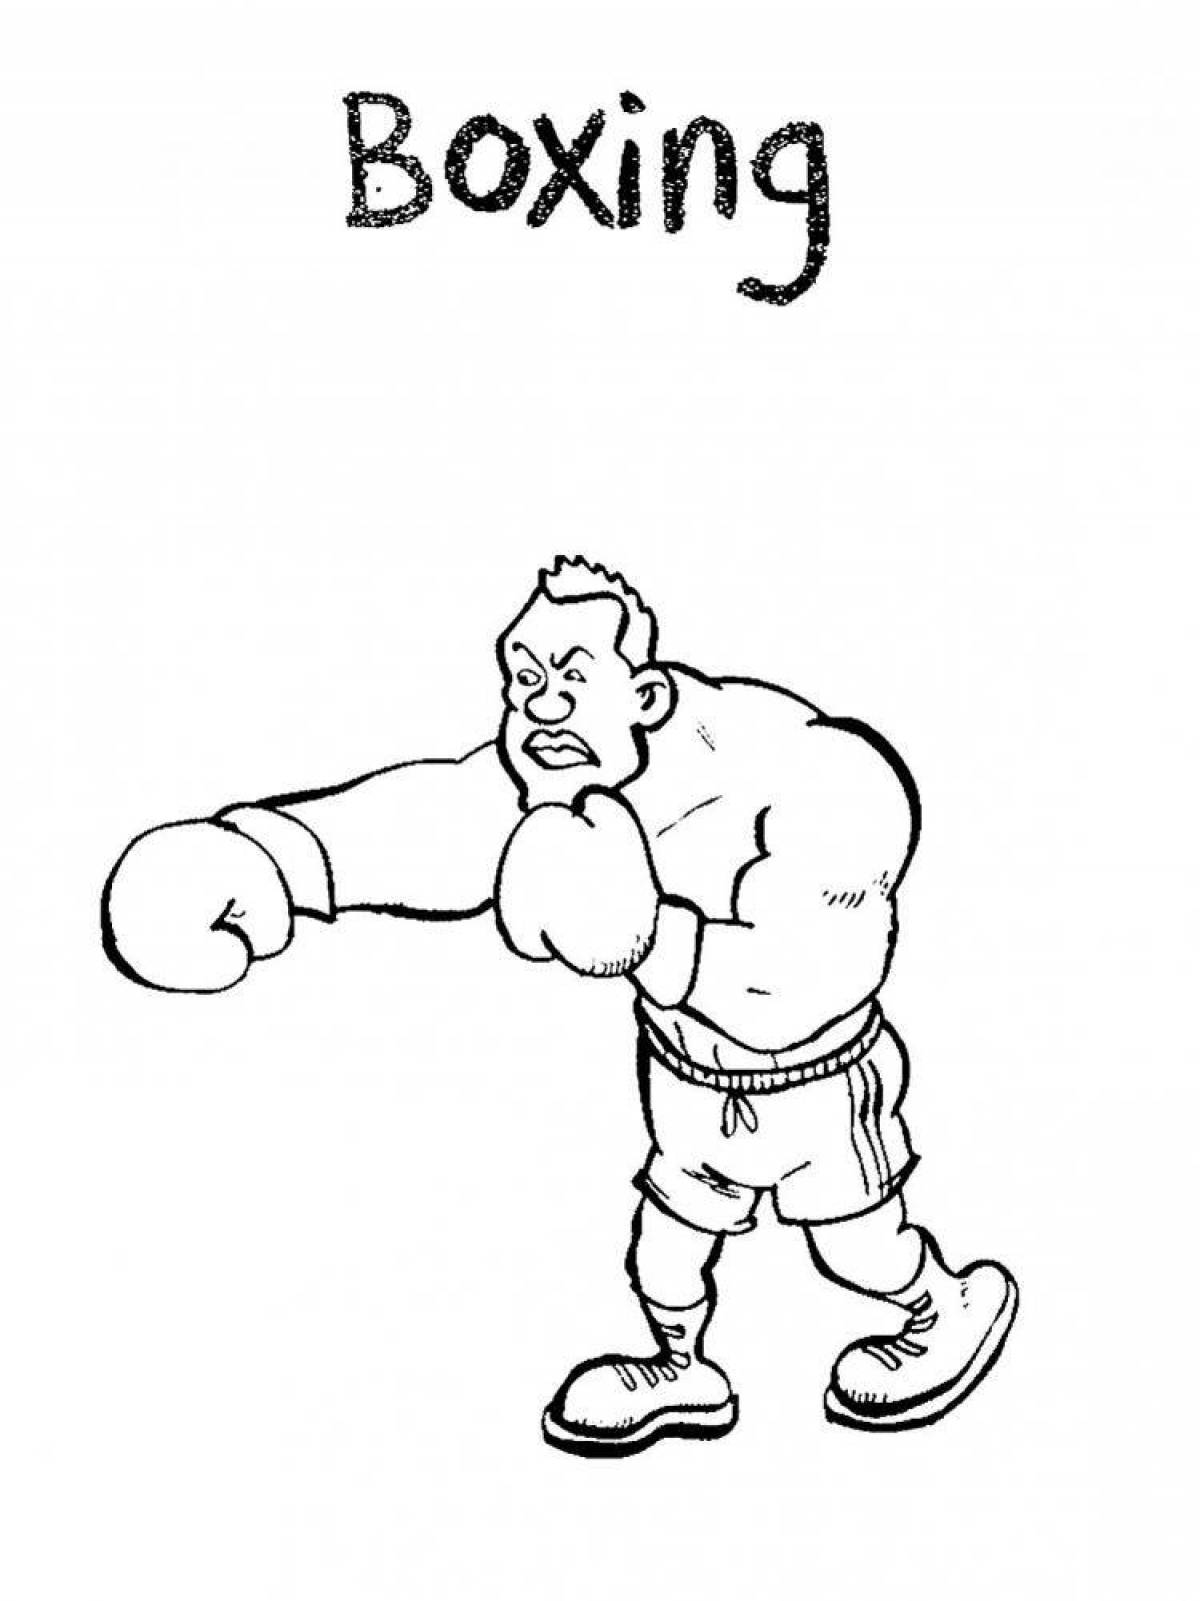 Amazing boxy boom coloring page